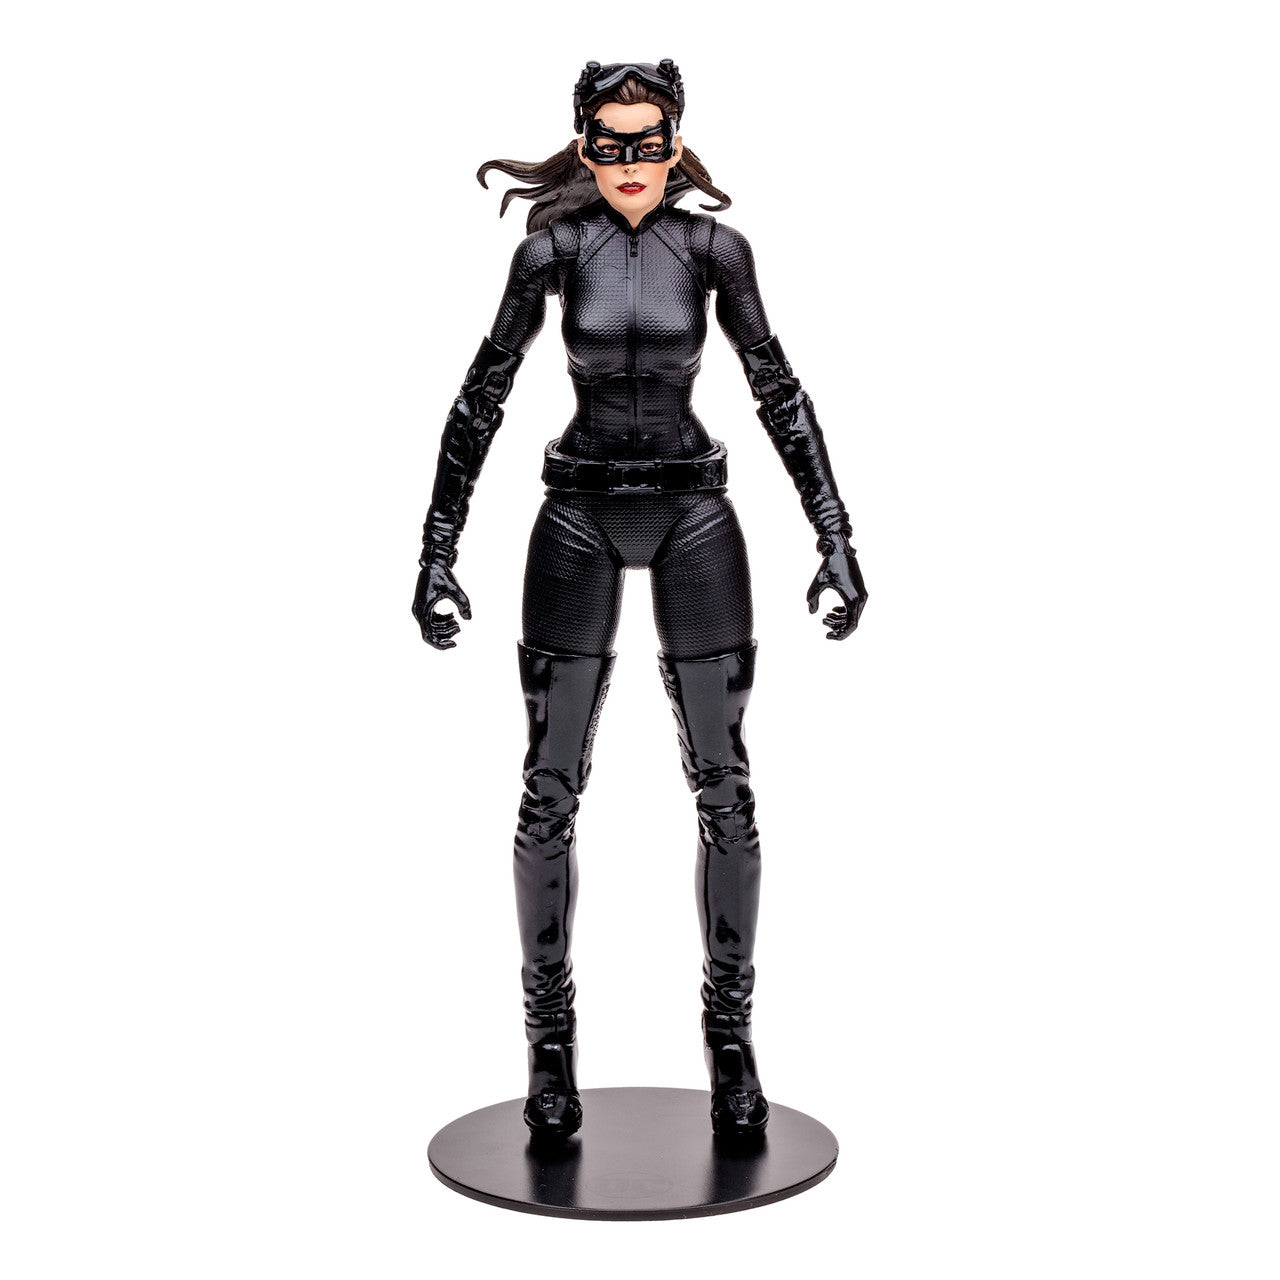 Catwoman and Batpod (The Dark Knight Rises) Figure and Vehicle